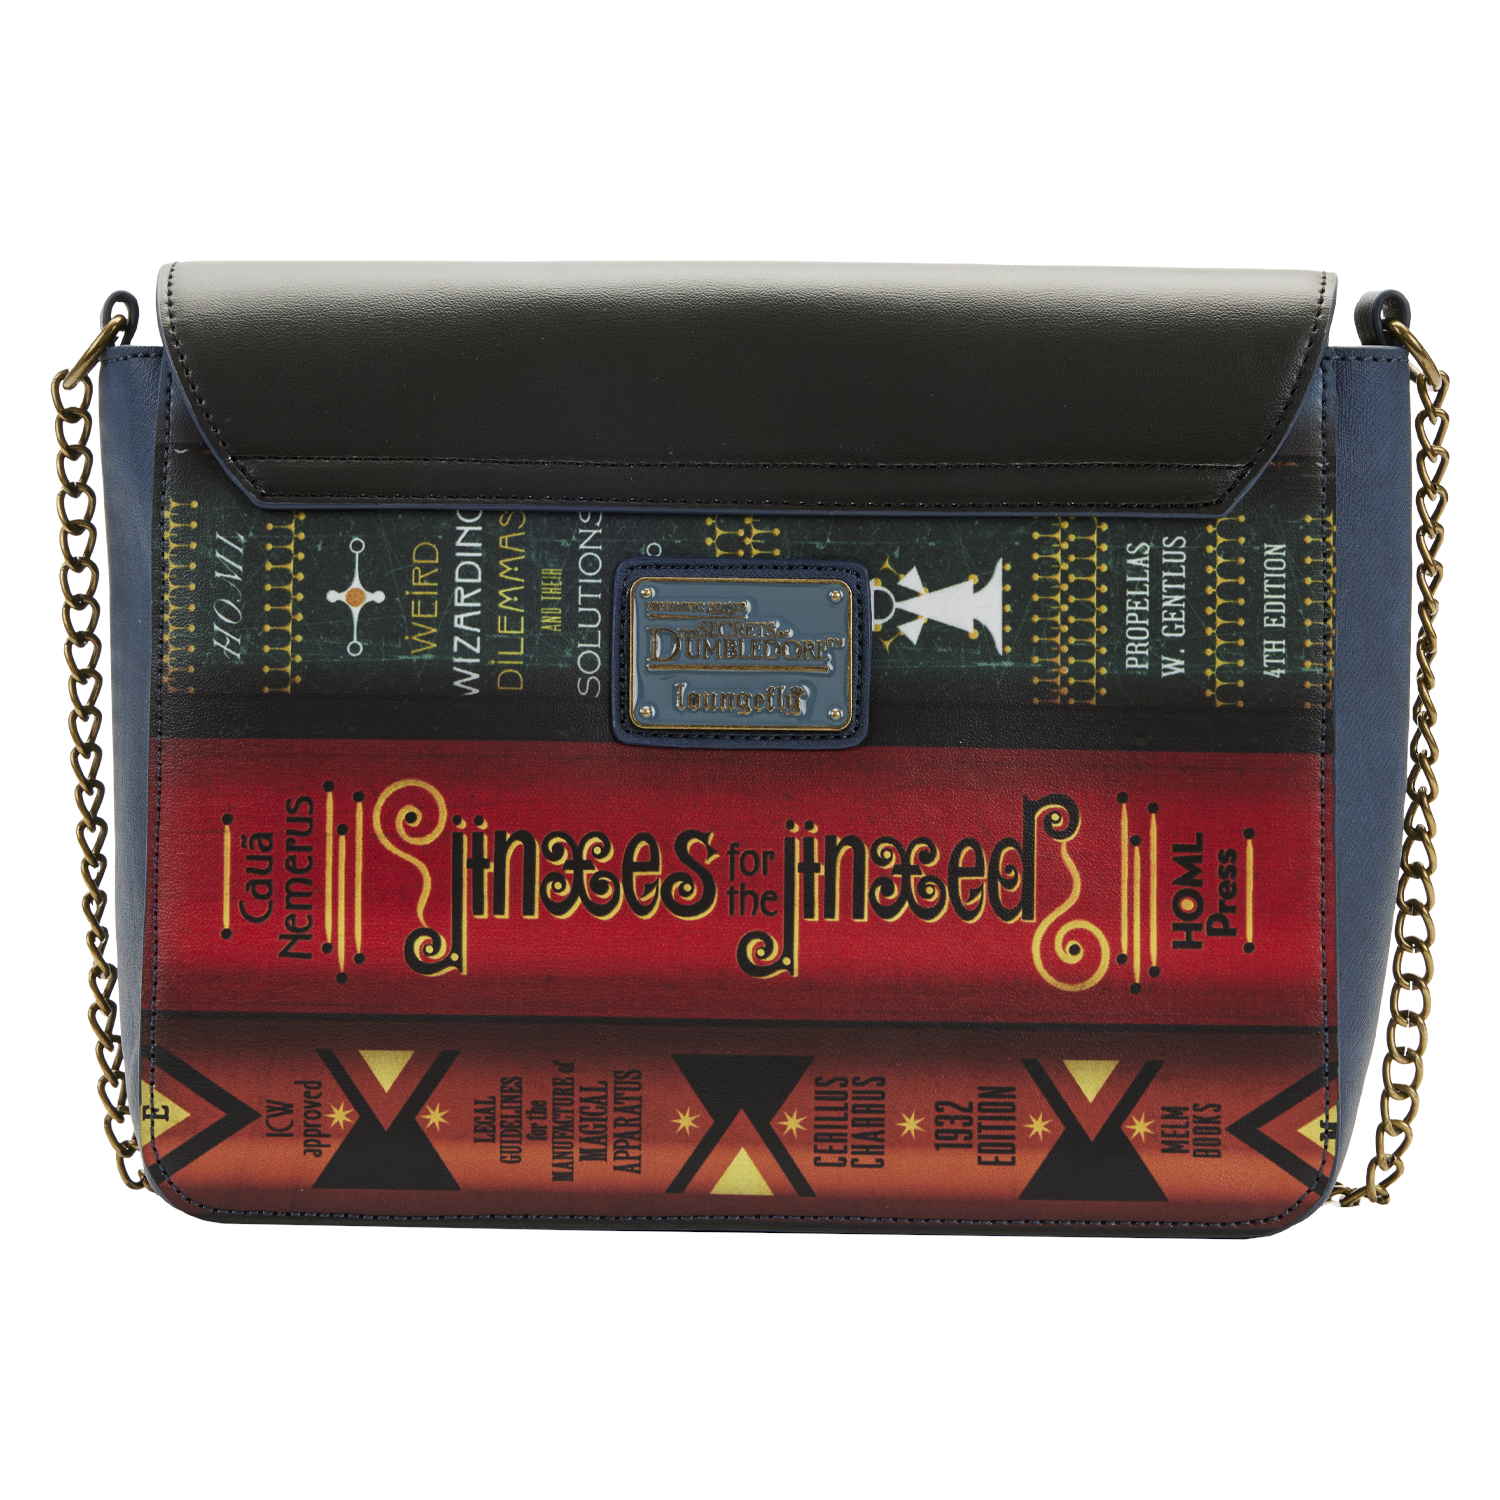 The Fantastic Beasts Magical Books Crossbody Bag is covered in enchanted texts on the back as well as the front.